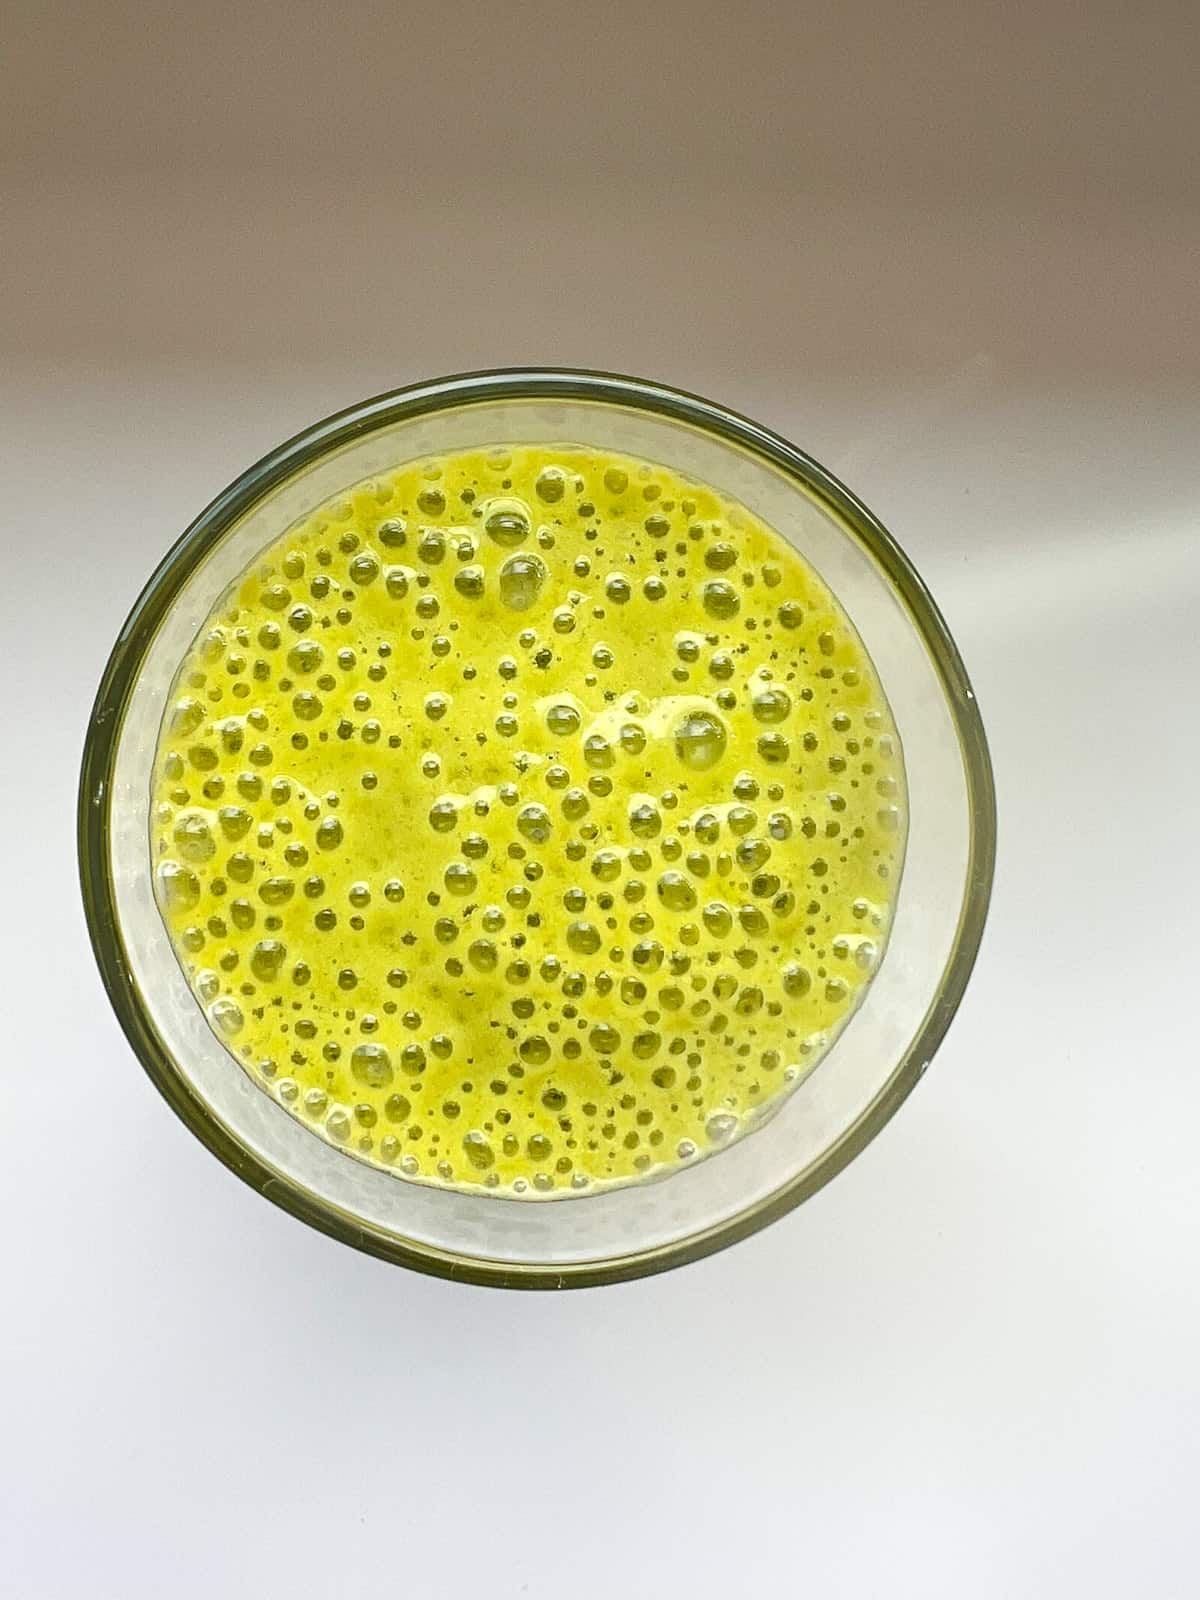 An image of green smoothie in a clear glass.